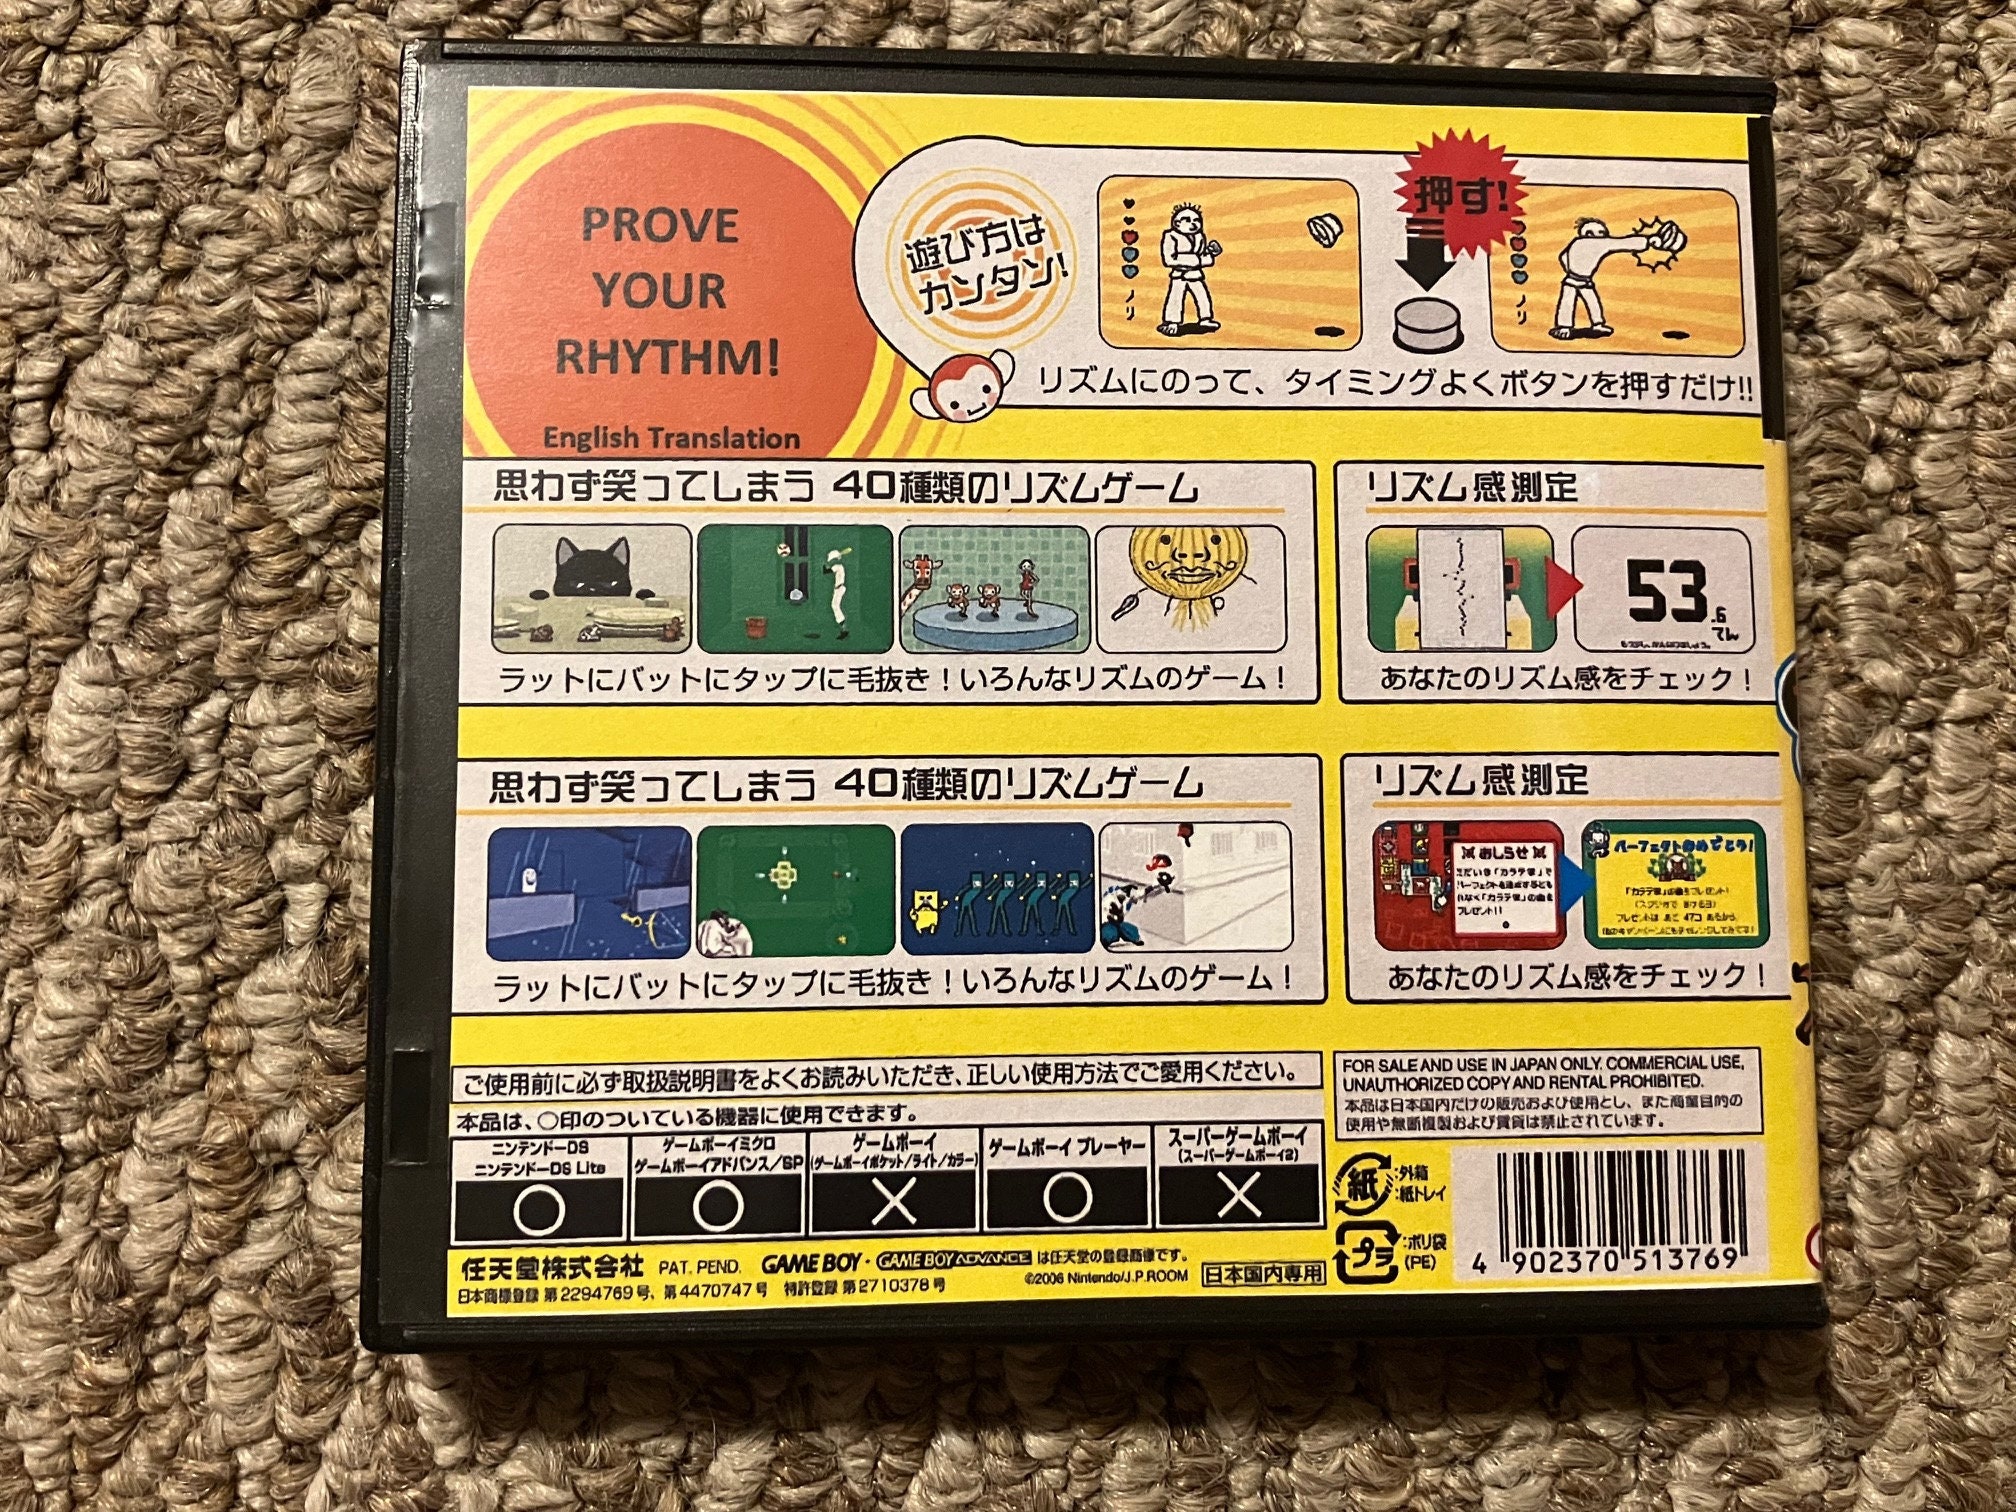  Rhythm Tengoku Gold- DS Game- New Japan Import : Video Games